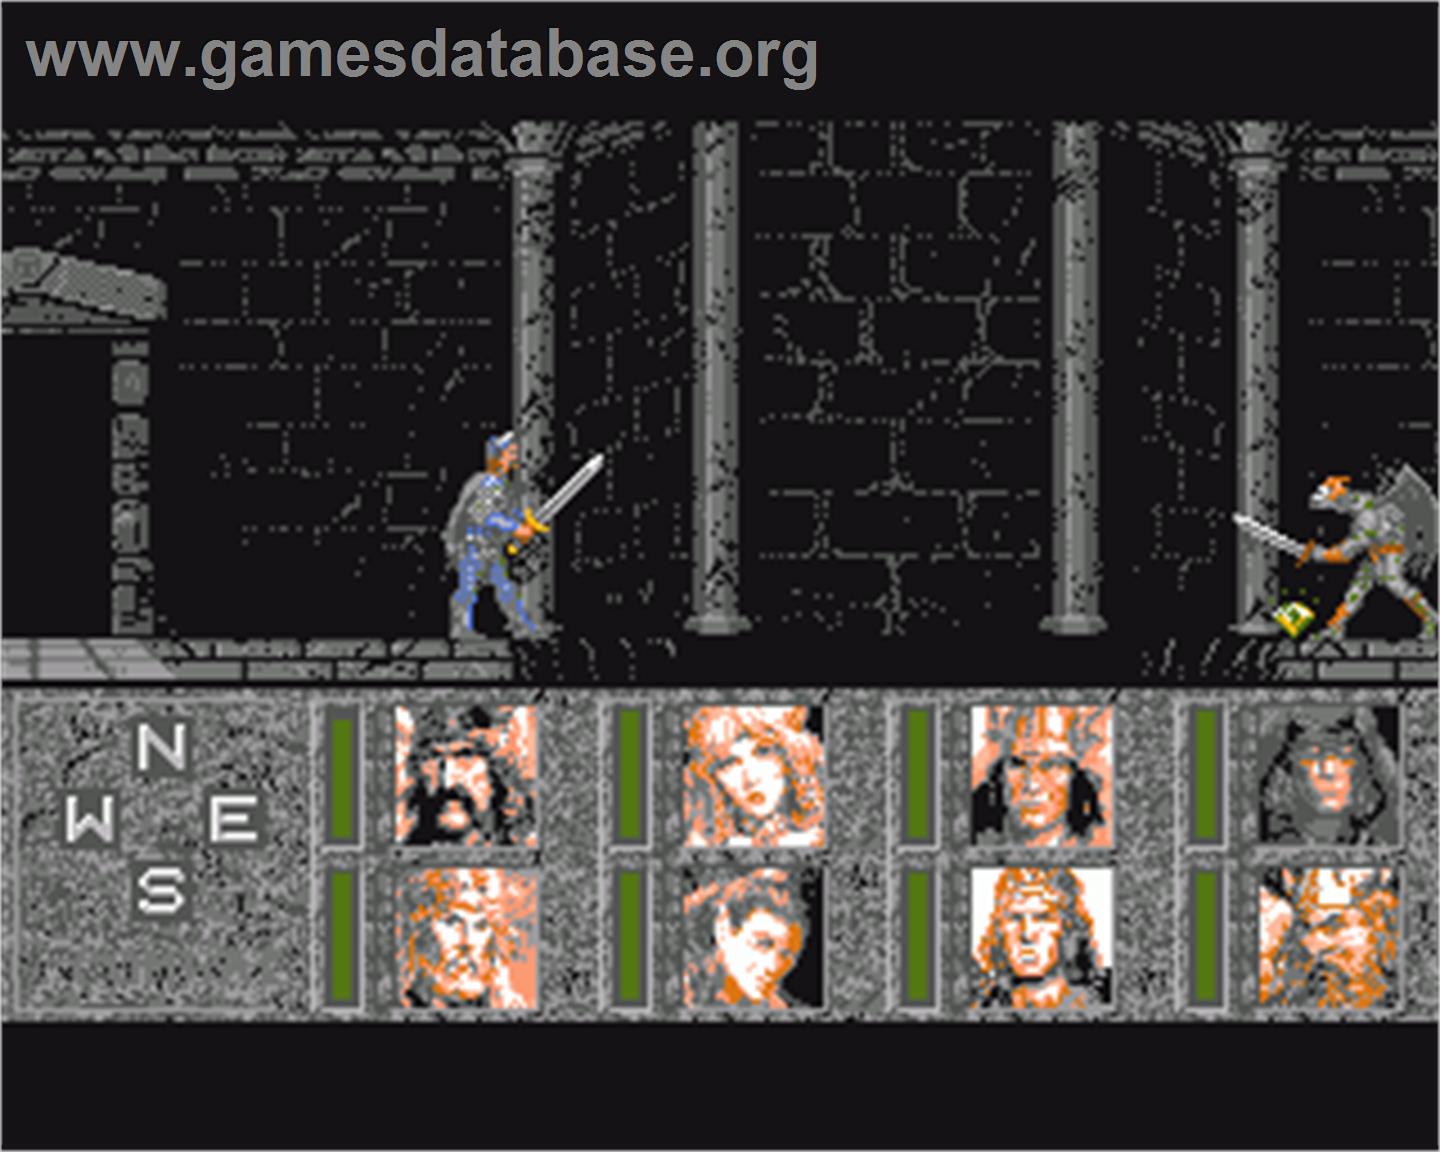 Heroes of the Lance - Commodore Amiga - Artwork - In Game